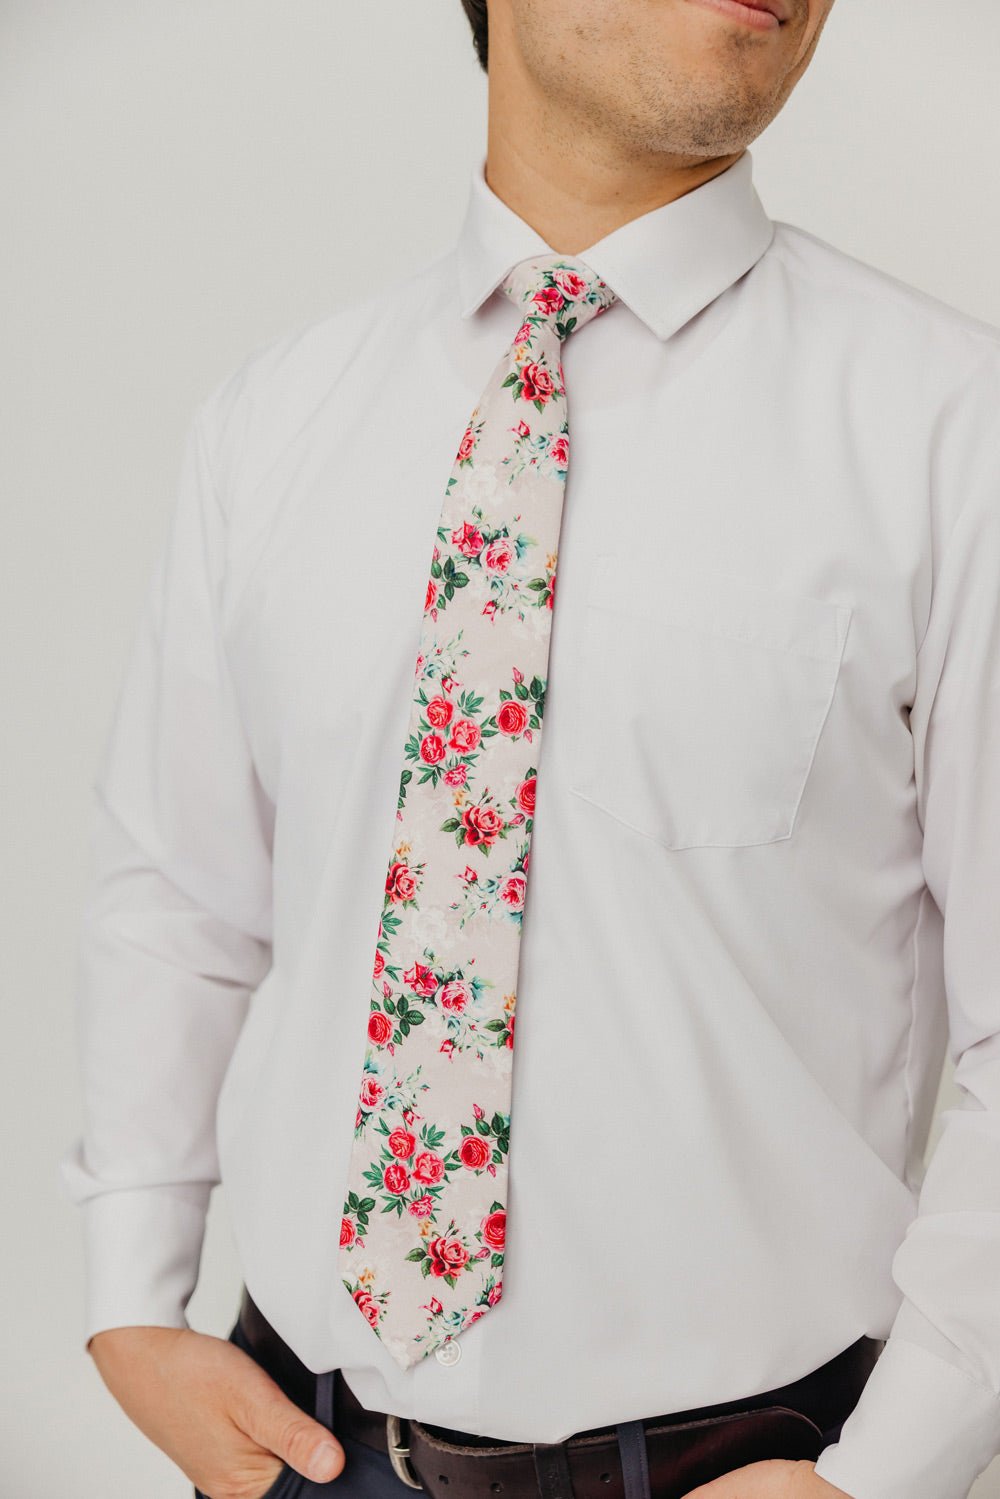 Rose Garden 3" Wide Standard Tie worn with a white shirt, black belt and black suit pants.